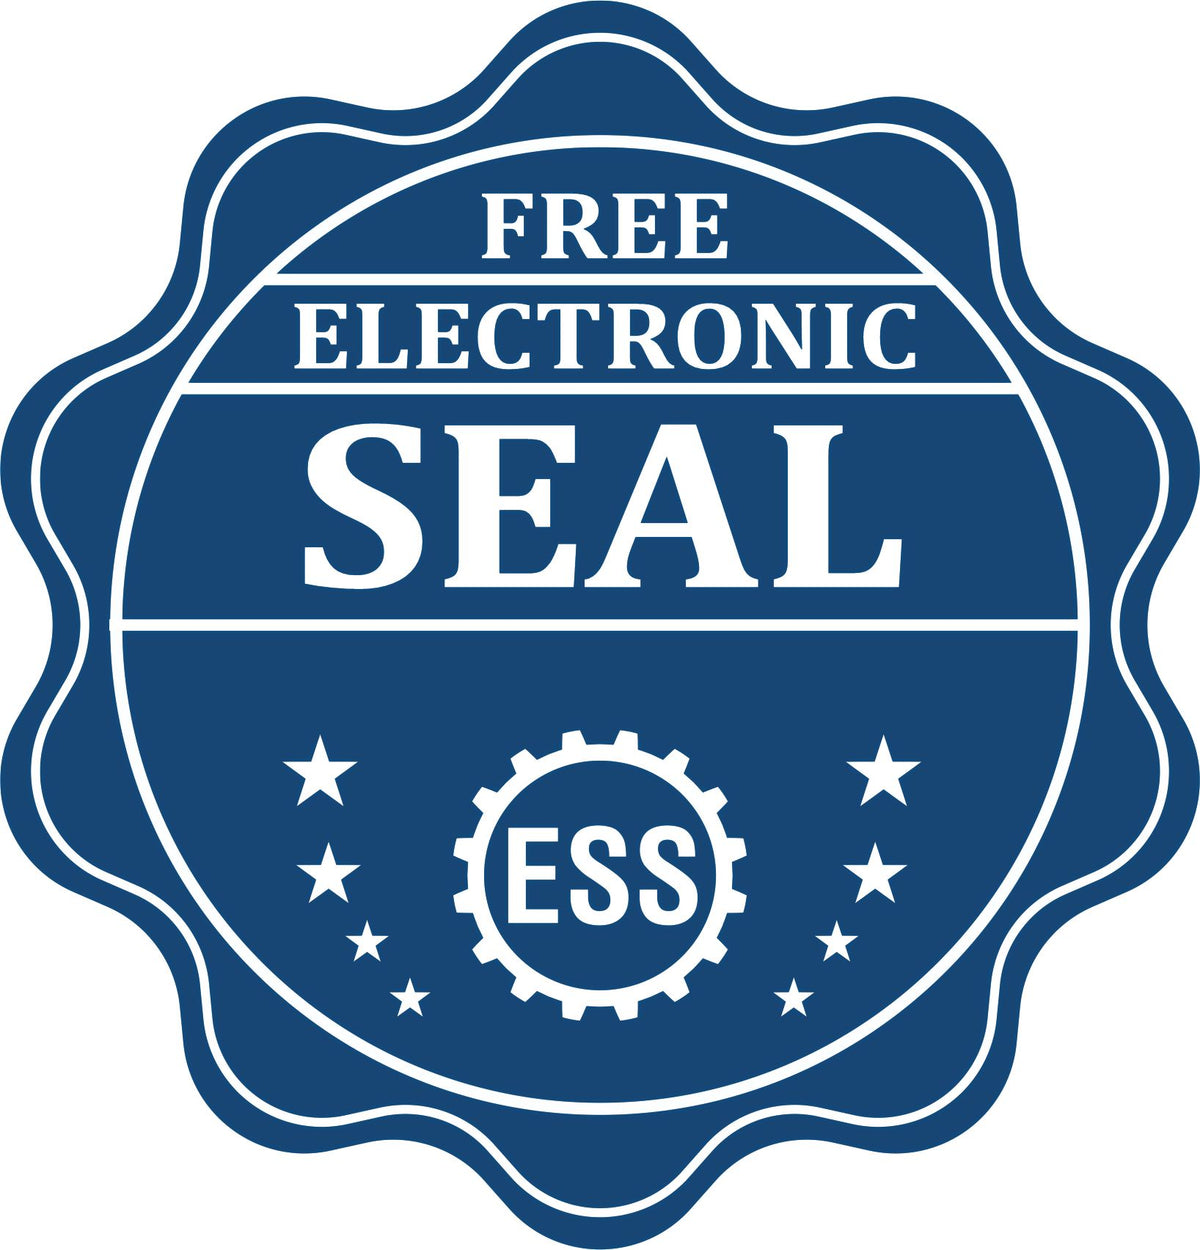 A badge showing a free electronic seal for the Gift Arkansas Landscape Architect Seal with stars and the ESS gear on the emblem.